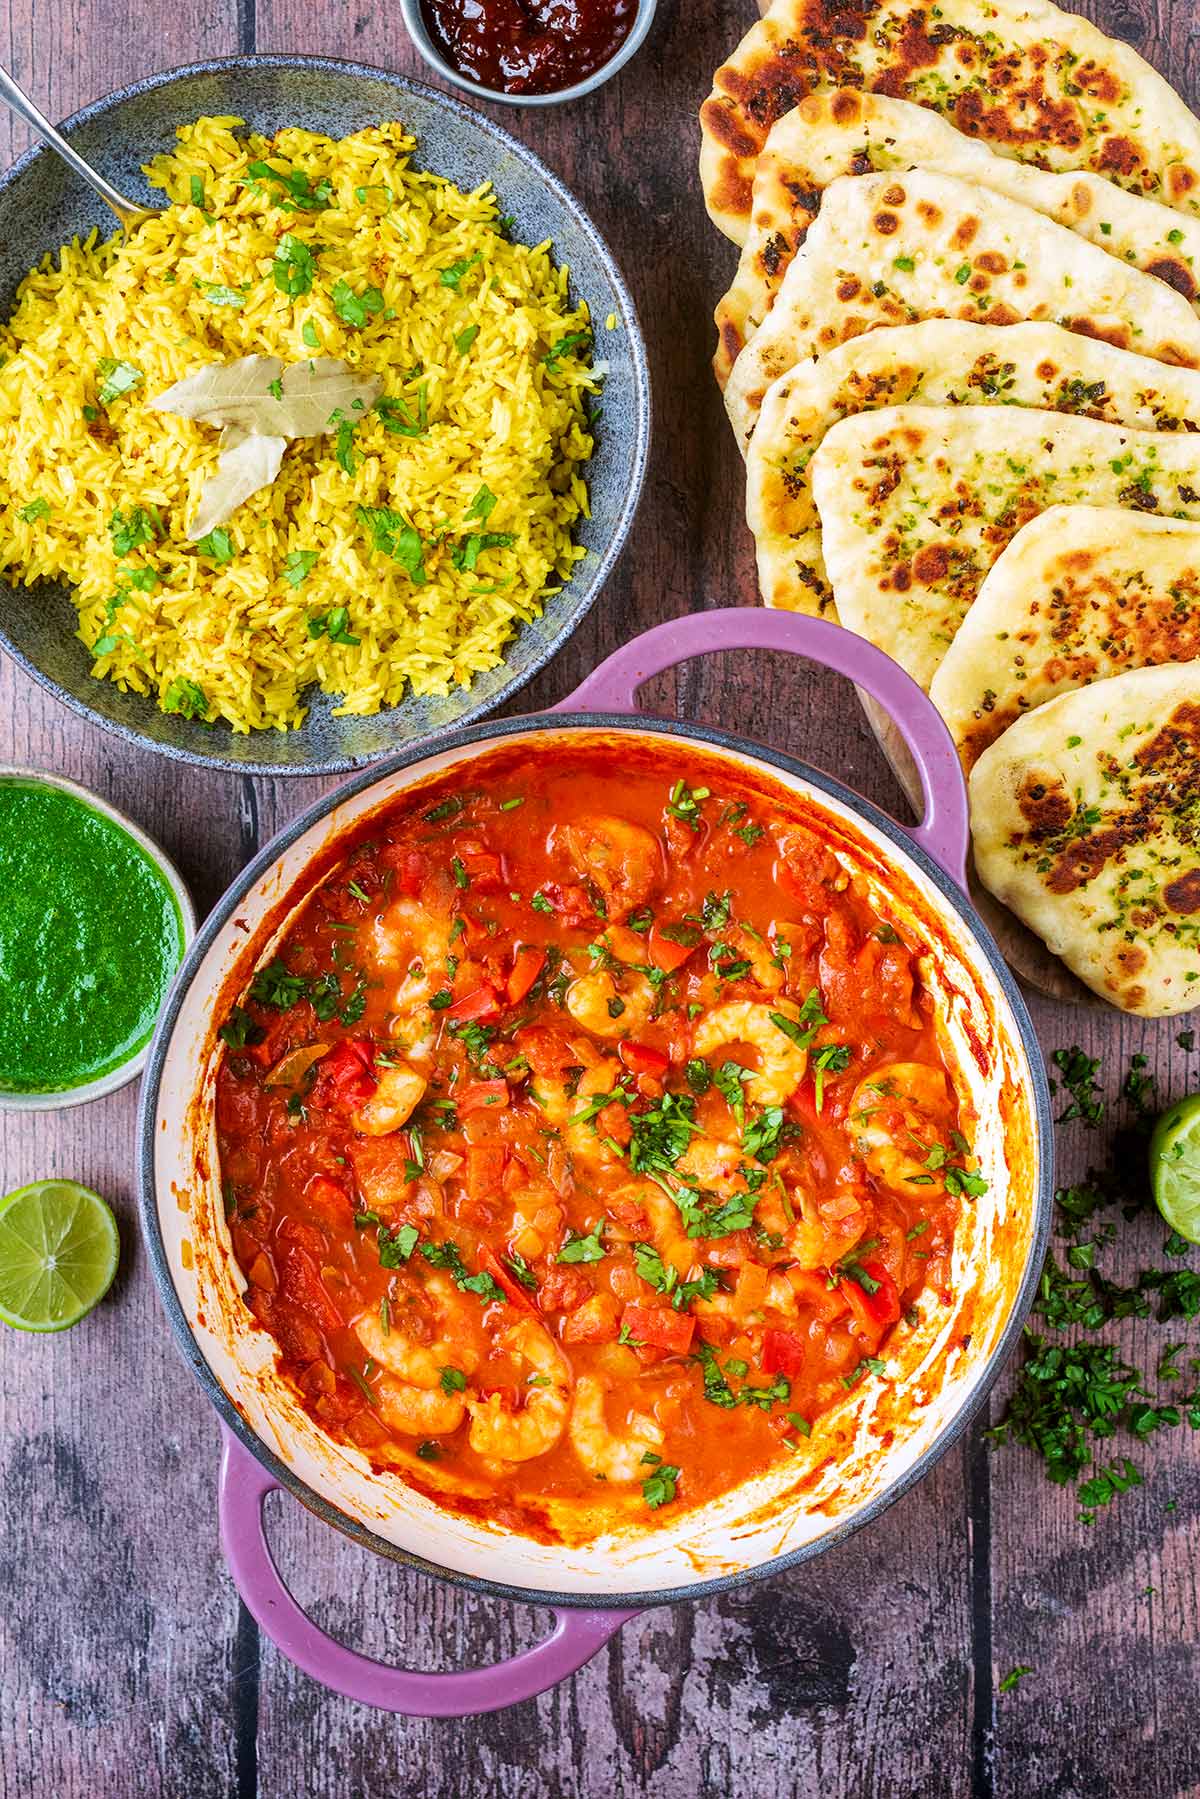 A large pan full of a prawn curry next to rice and naan breads.